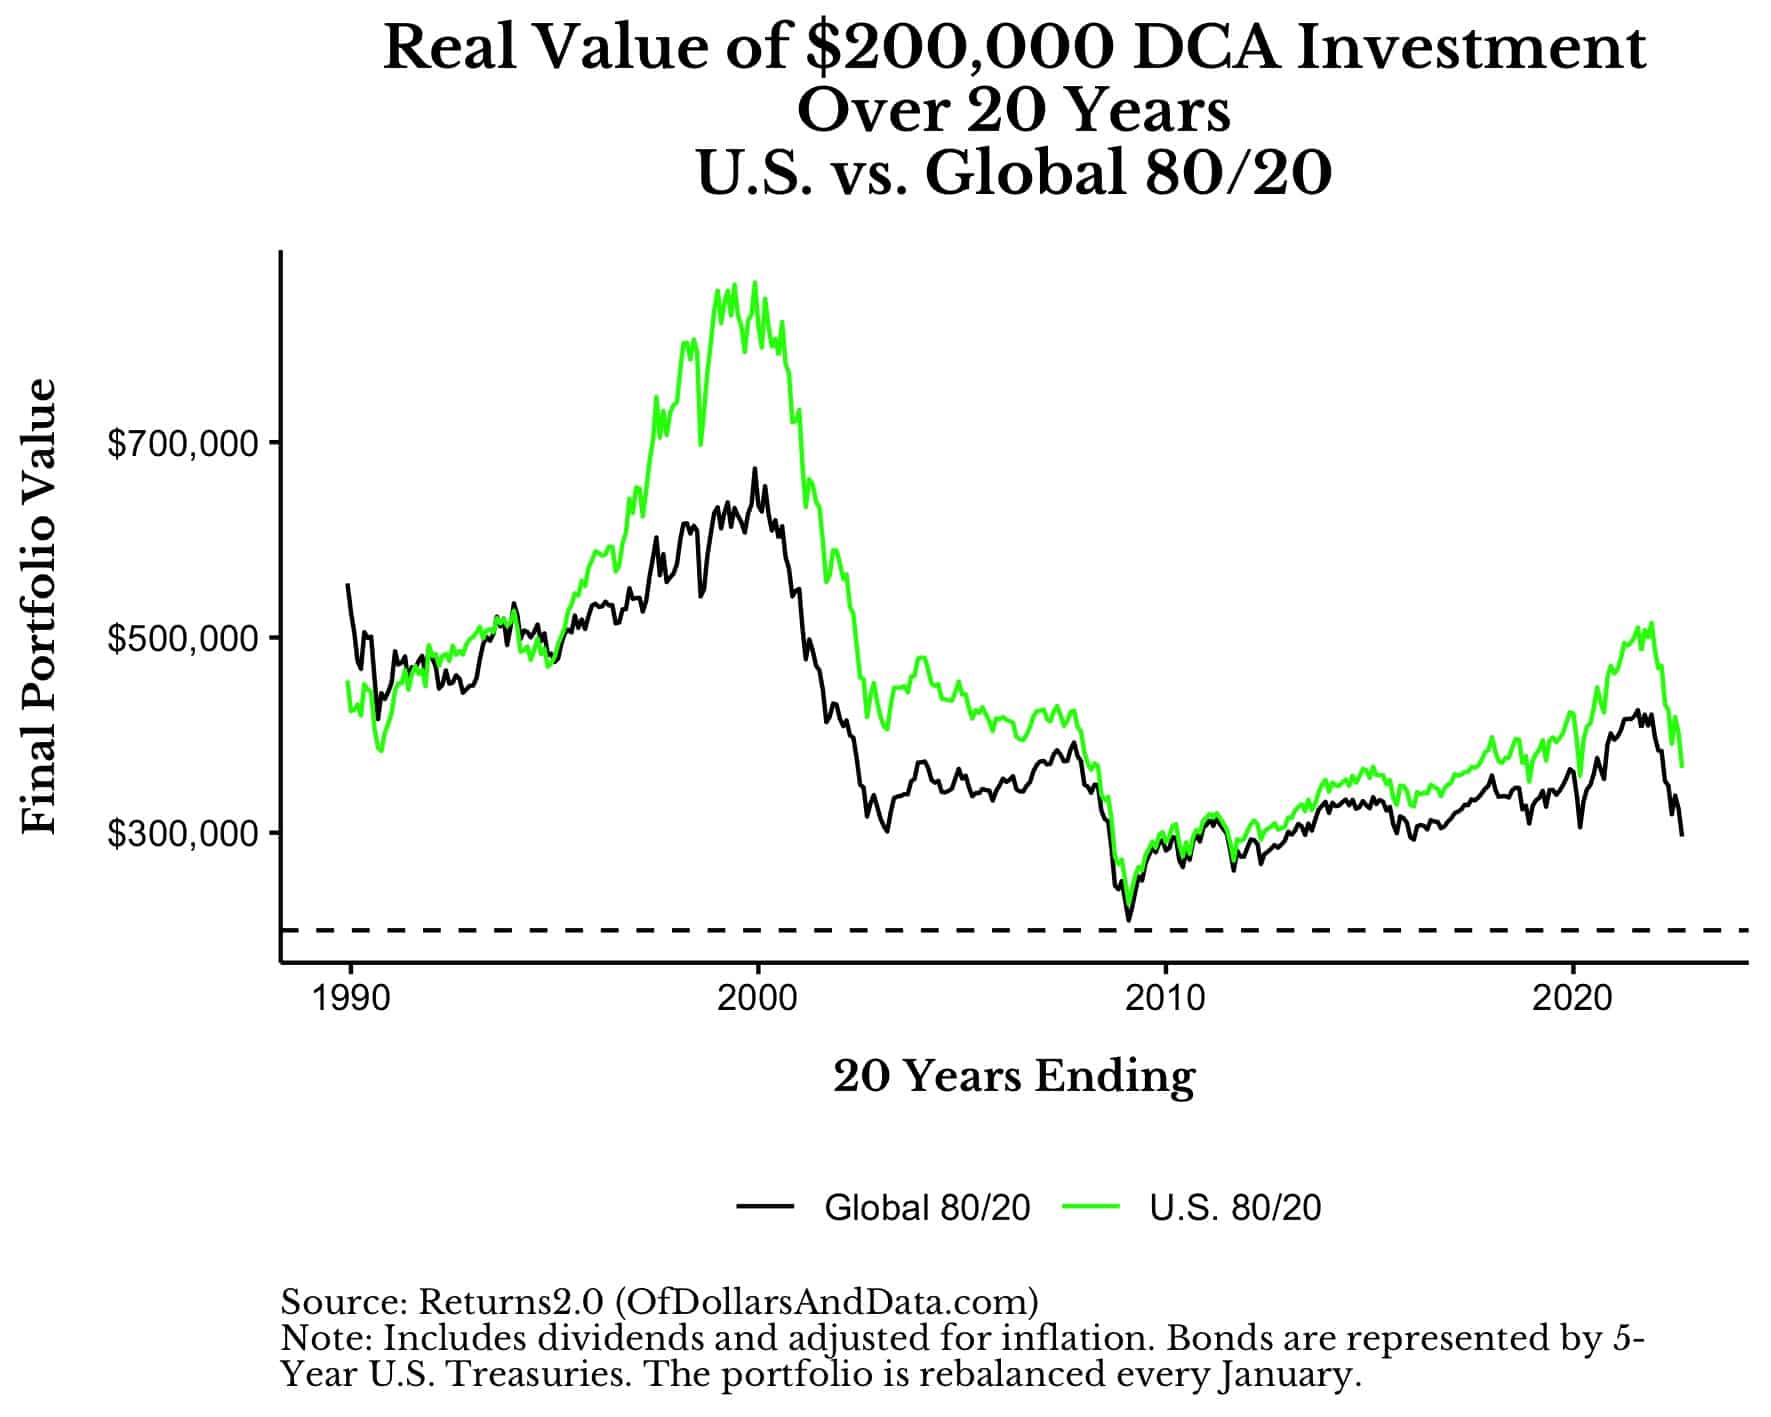 Real value of $200,000 DCA investment into US 80/20 and Global 80/20 over 20 years from 1970 to 2022.